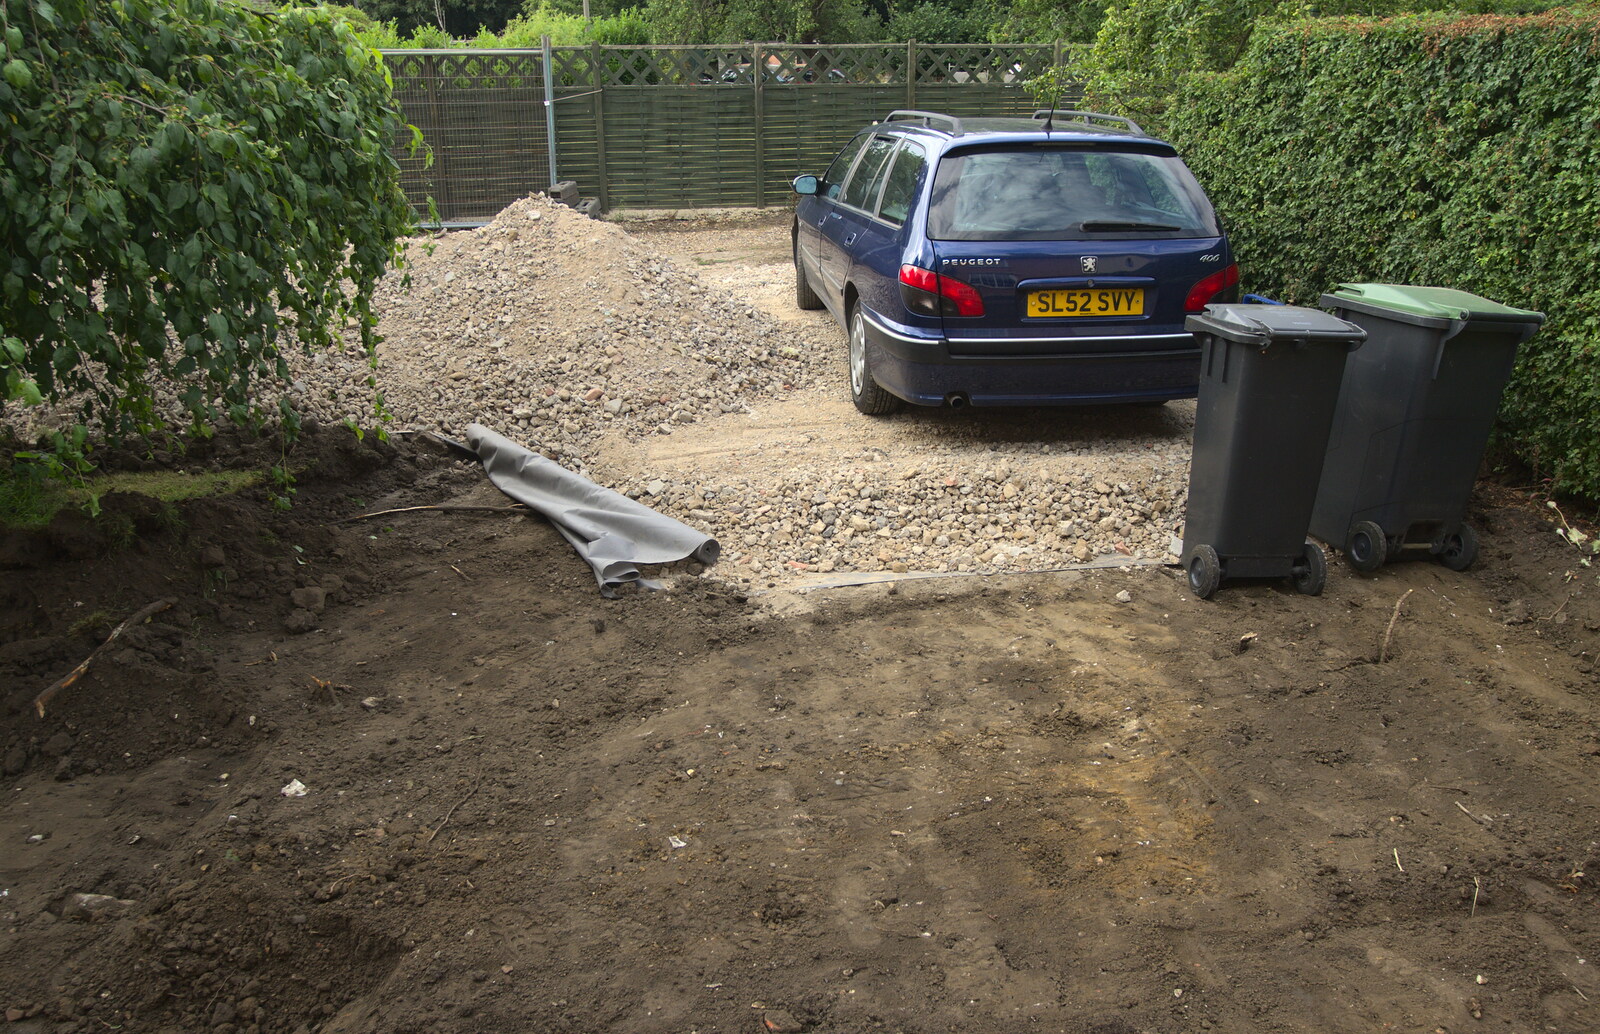 The temporary crushed concrete drive from Grand Designs: Building Commences, Brome, Suffolk - 8th August 2013